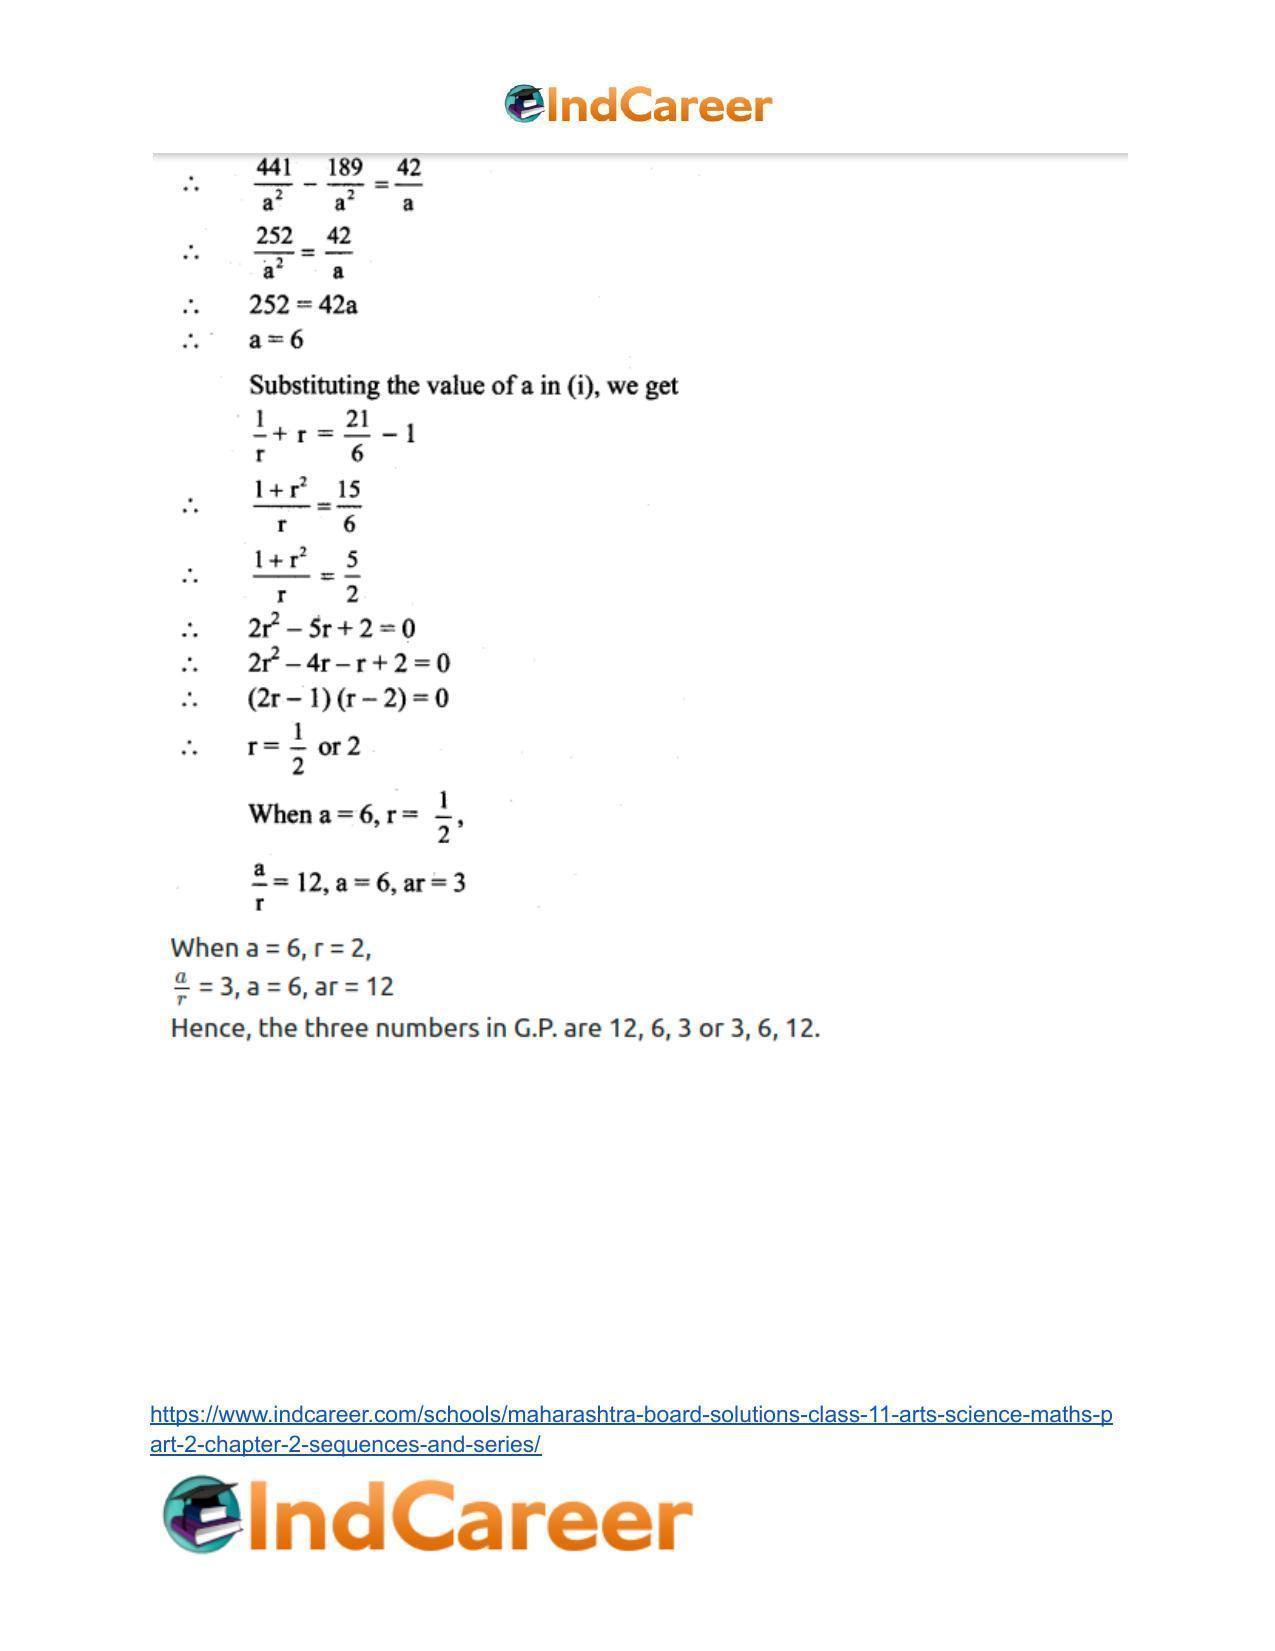 Maharashtra Board Solutions Class 11-Arts & Science Maths (Part 2): Chapter 2- Sequences and Series - Page 12